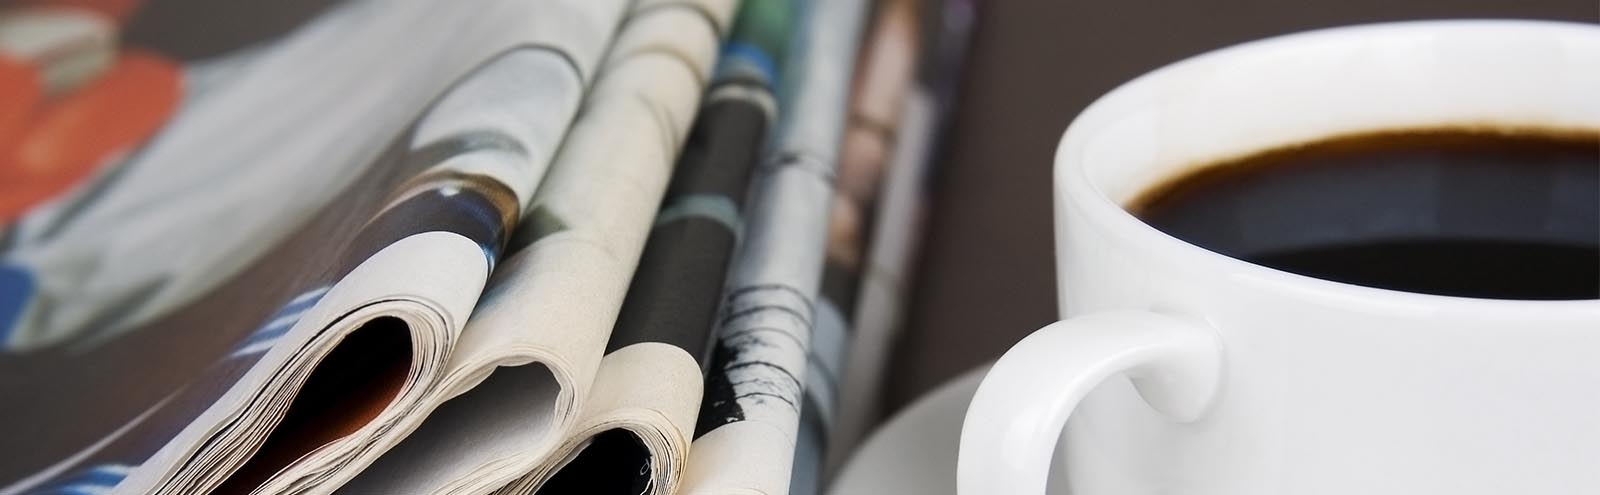 A close up of folded newspapers with a cup of coffee to the right.